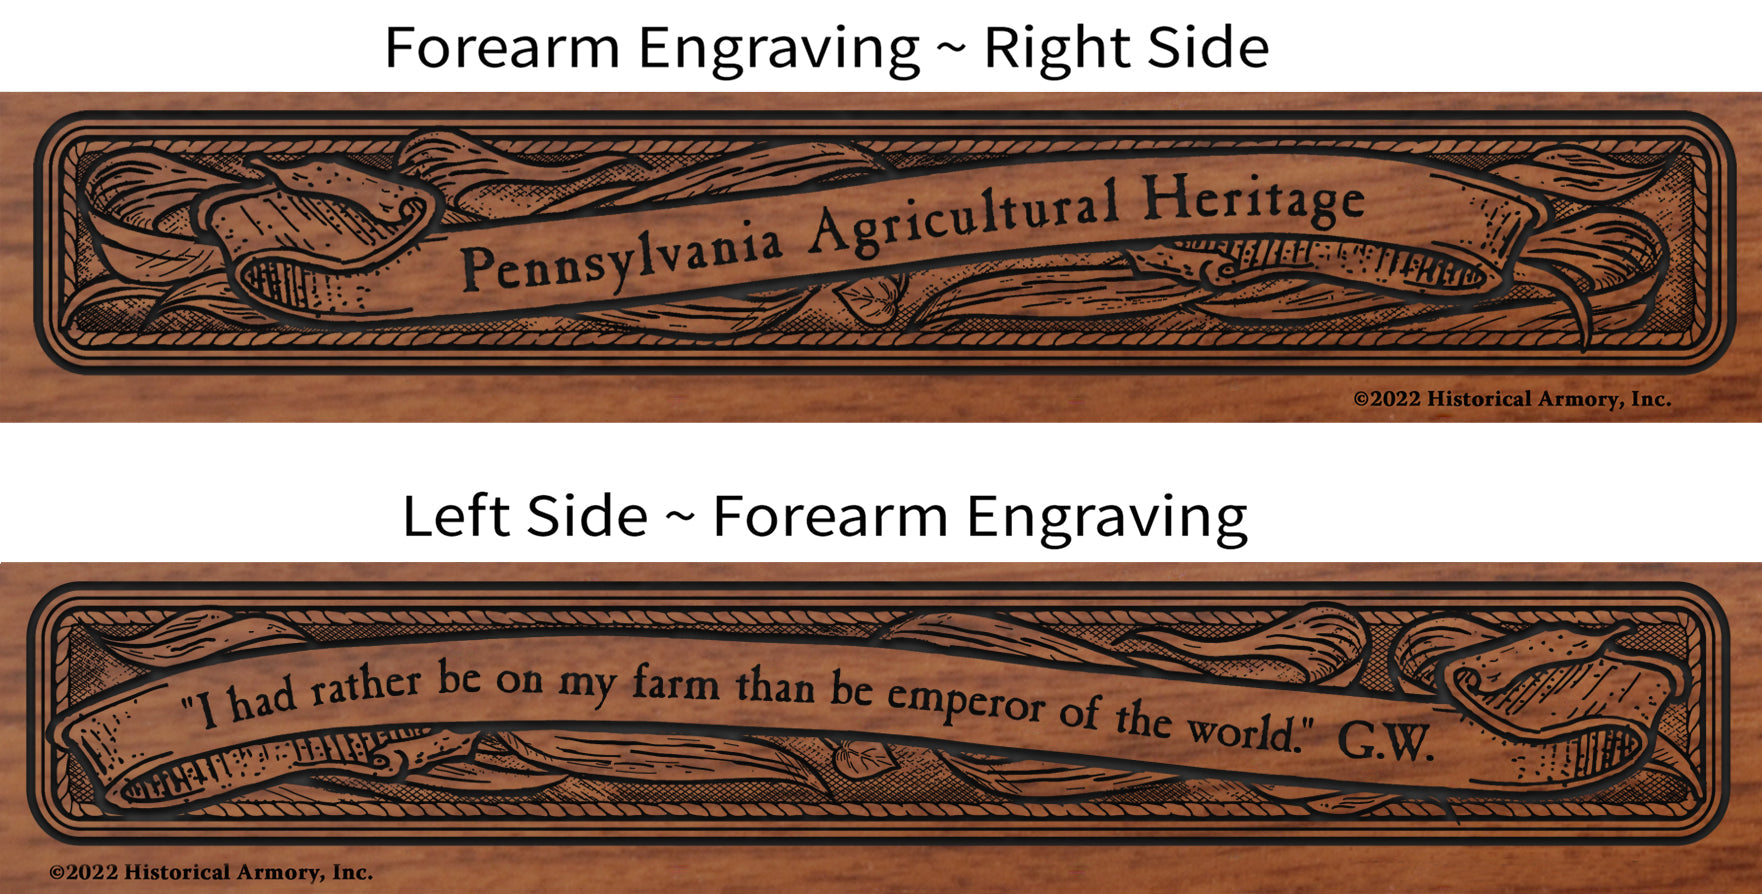 Pennsylvania Agricultural Heritage Engraved Rifle Forearm